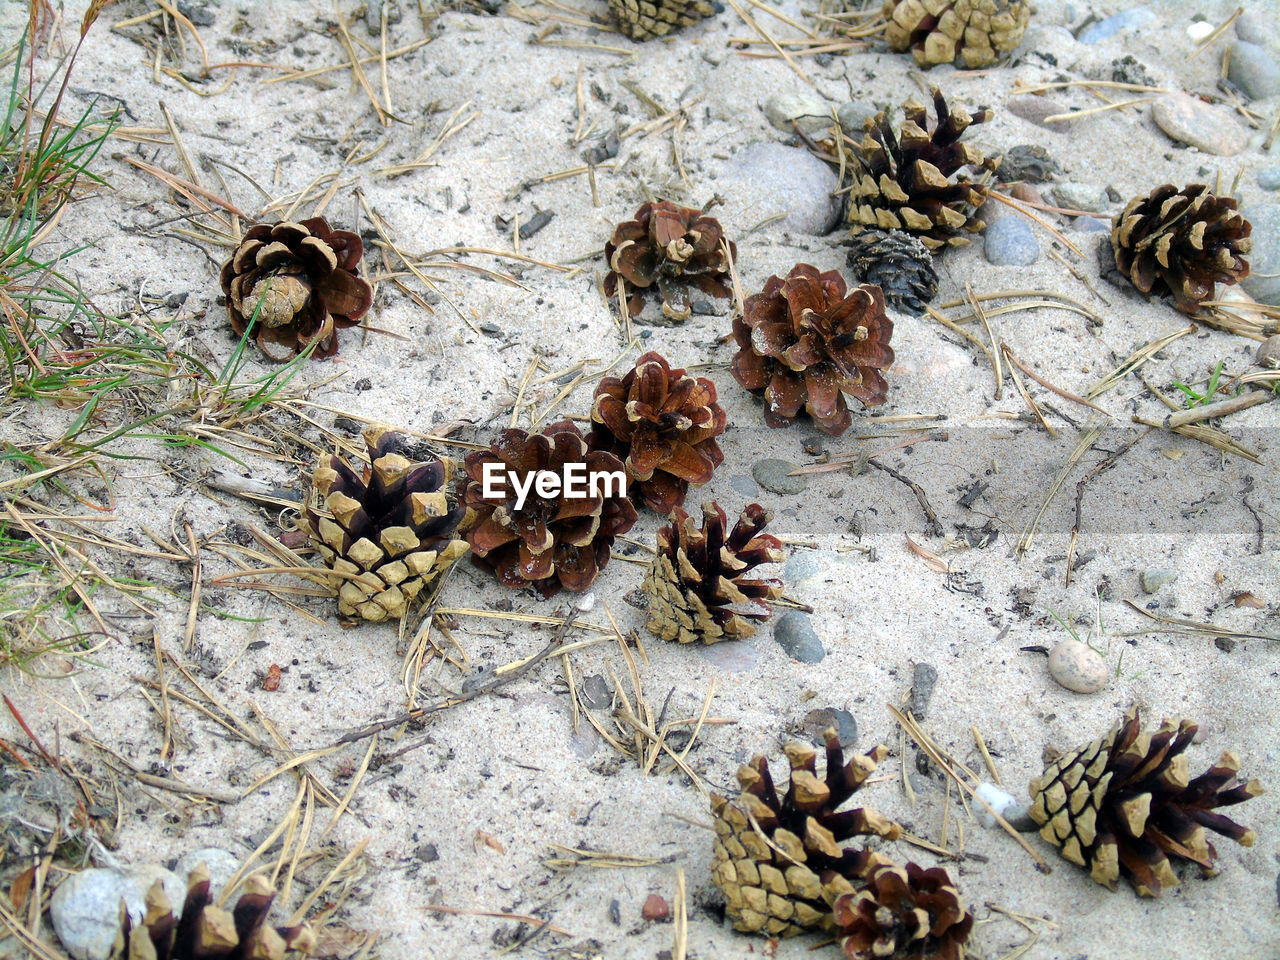 Pine cones in the sand